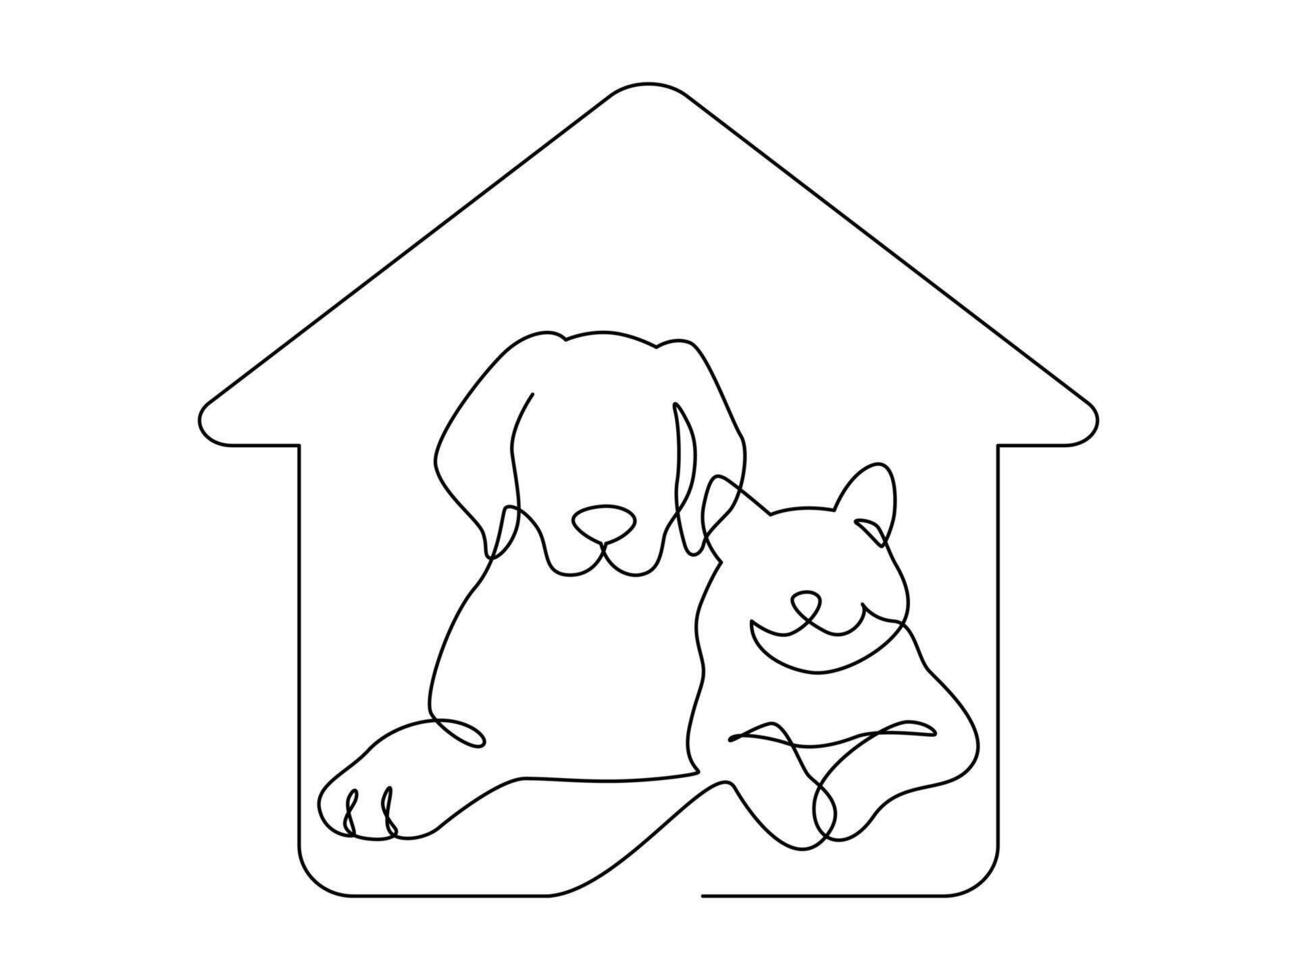 Continuous line drawing head of cat and dog sitting together in the house. Single linear decorative logo, Pet shop or veterinarian design. illustration. vector